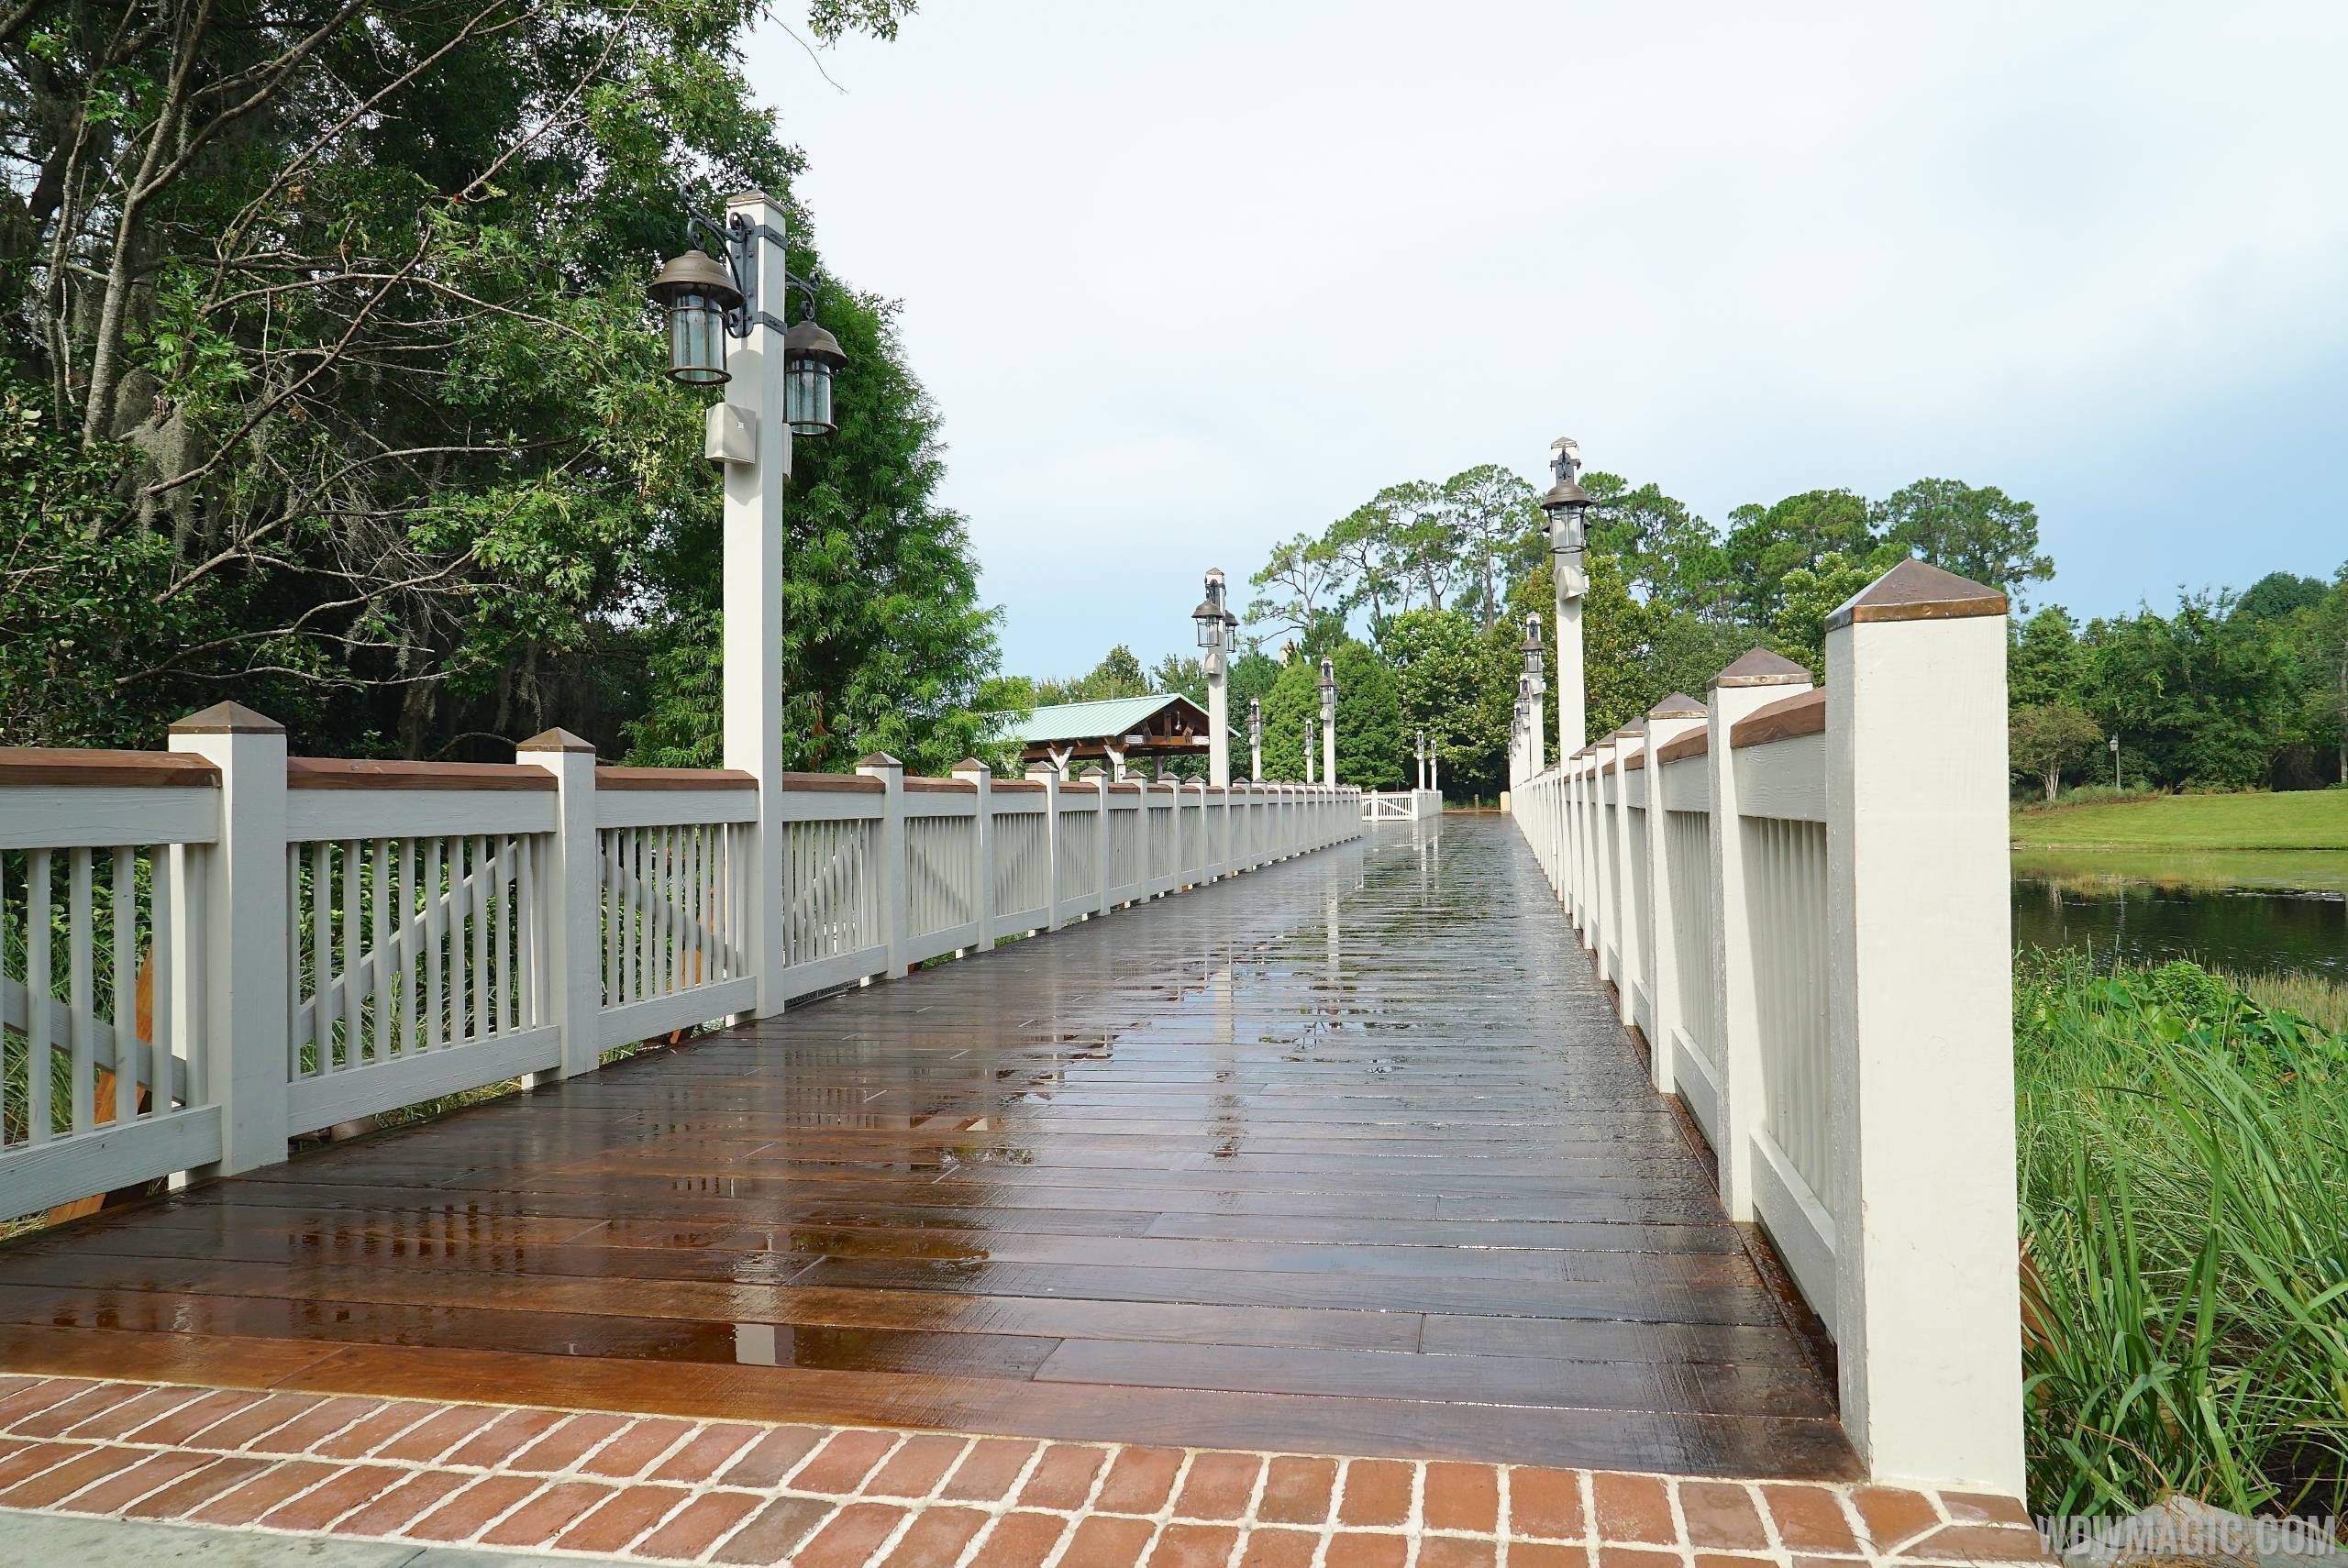 Marketplace to Saratoga Springs Resort bridge and boat dock complete